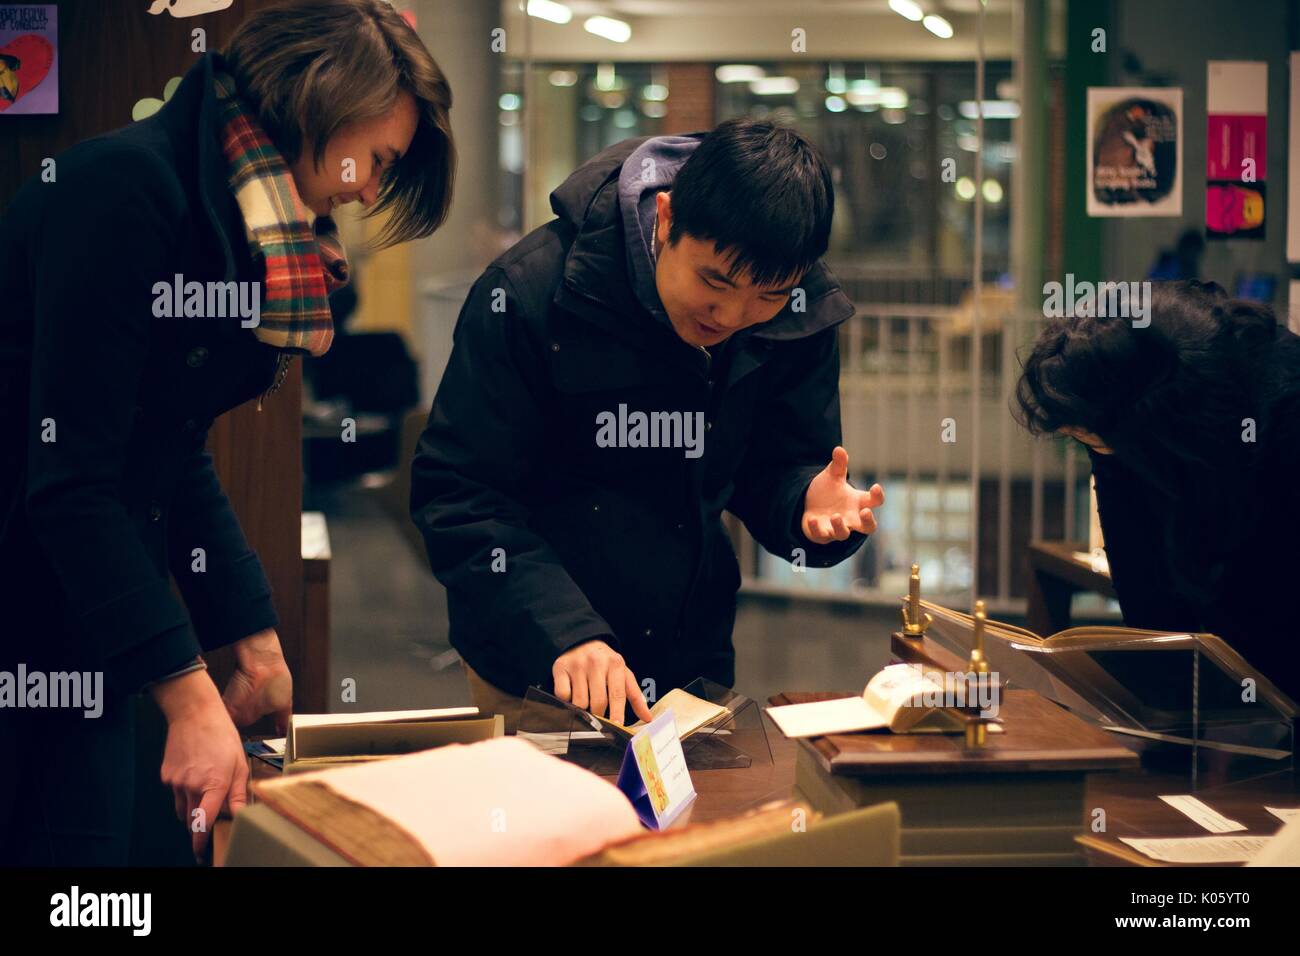 Asian male college student wearing a jacket, passionately reading aloud from a manuscript in the Special Collections department of a University library, one hand pointing to a passage in the book, the other hand gesturing, while a female student smiles and looks on, 2016. Courtesy Eric Chen. Stock Photo